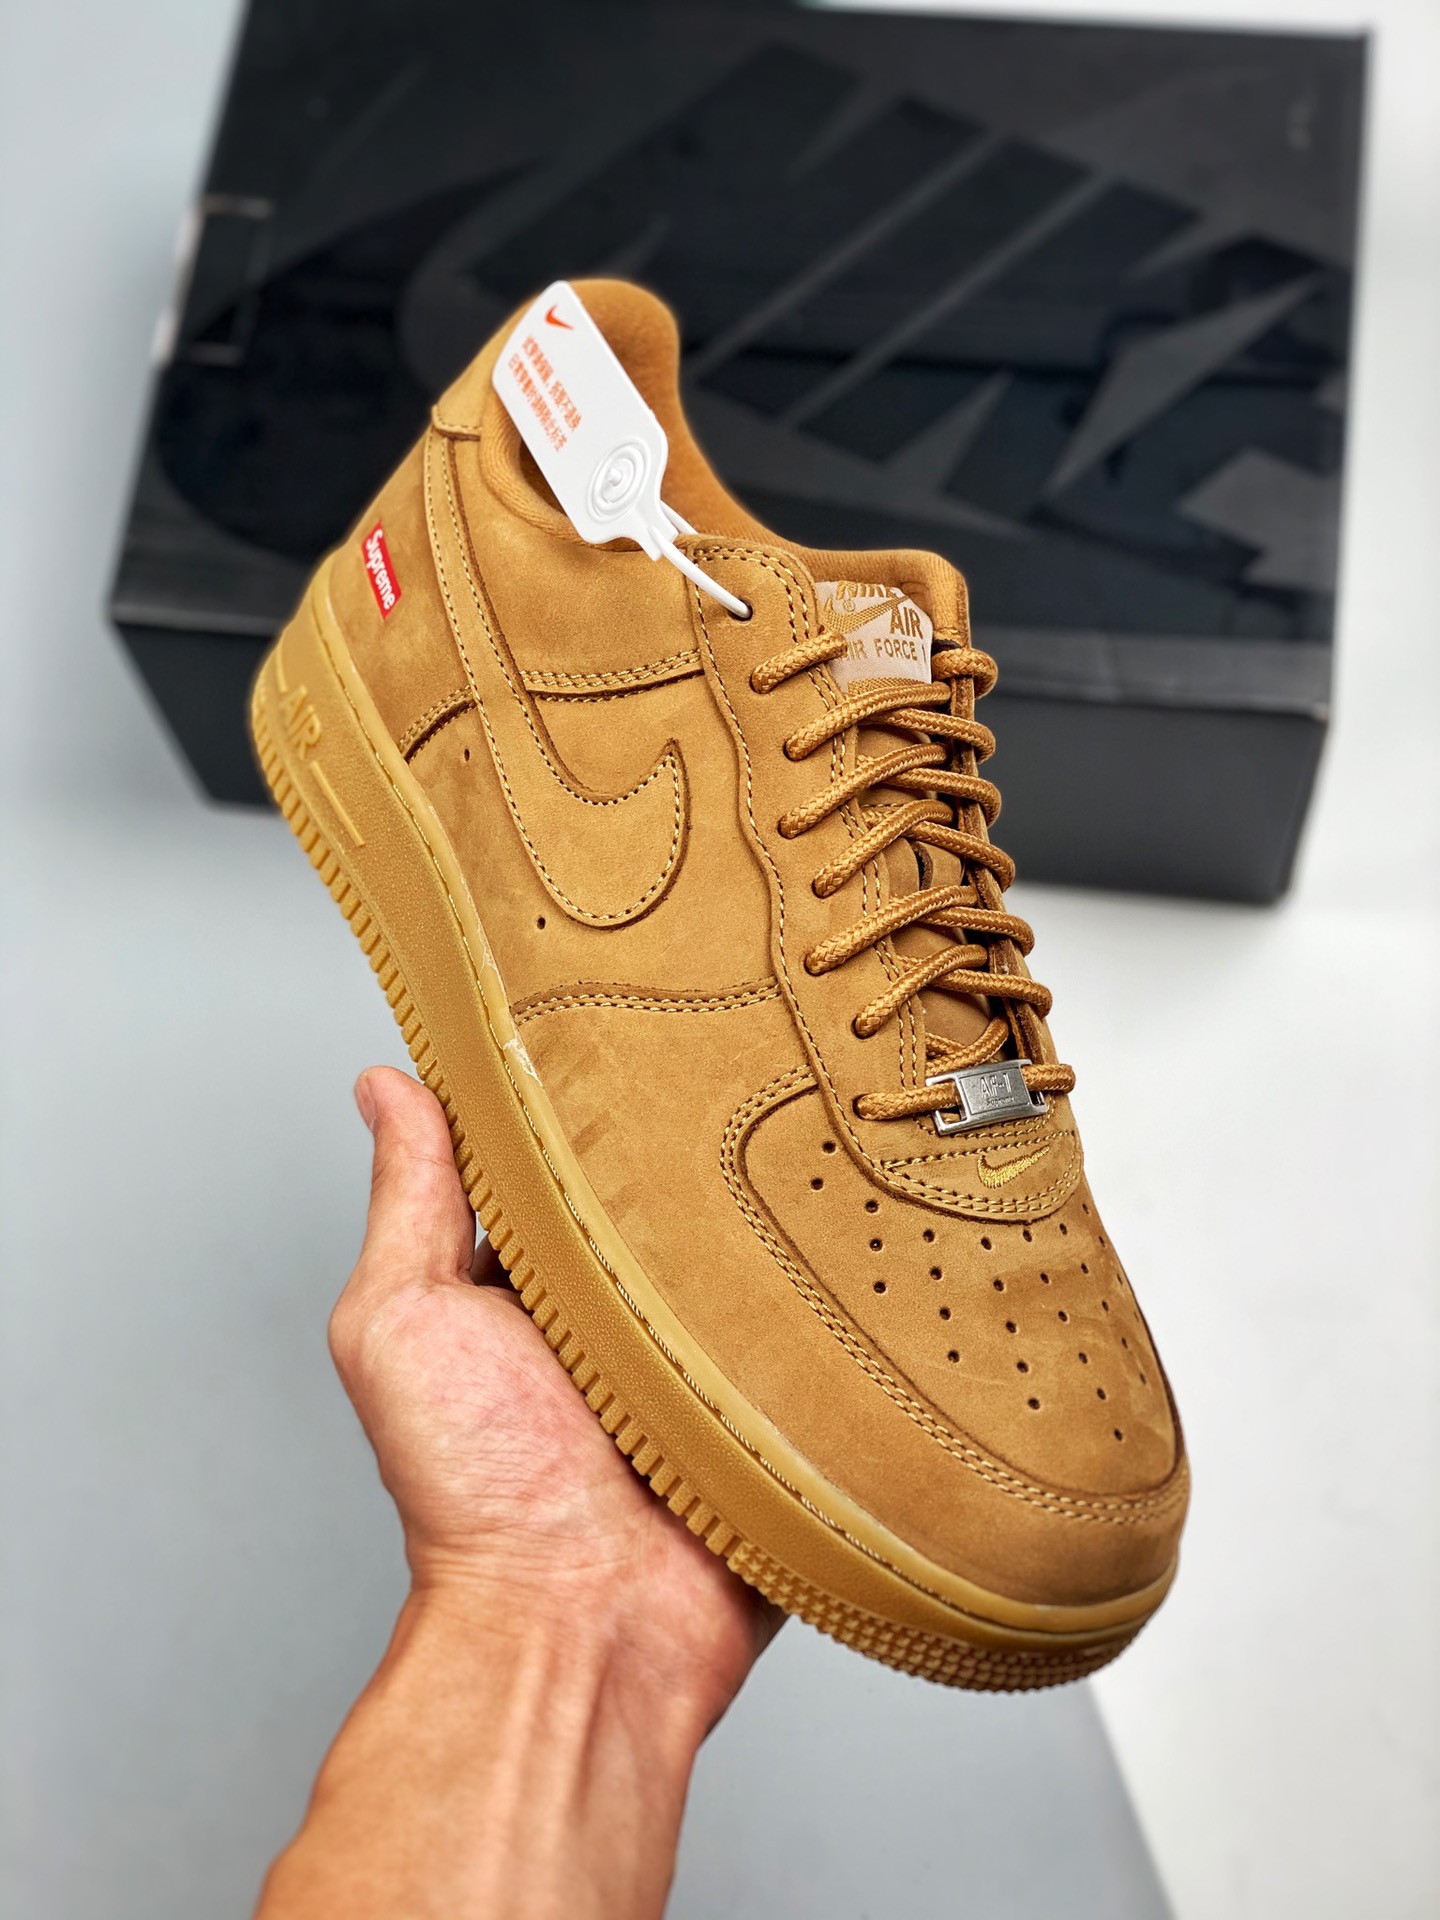 Supreme x Nike Air AF Force 1 Low "Flax" Shoes